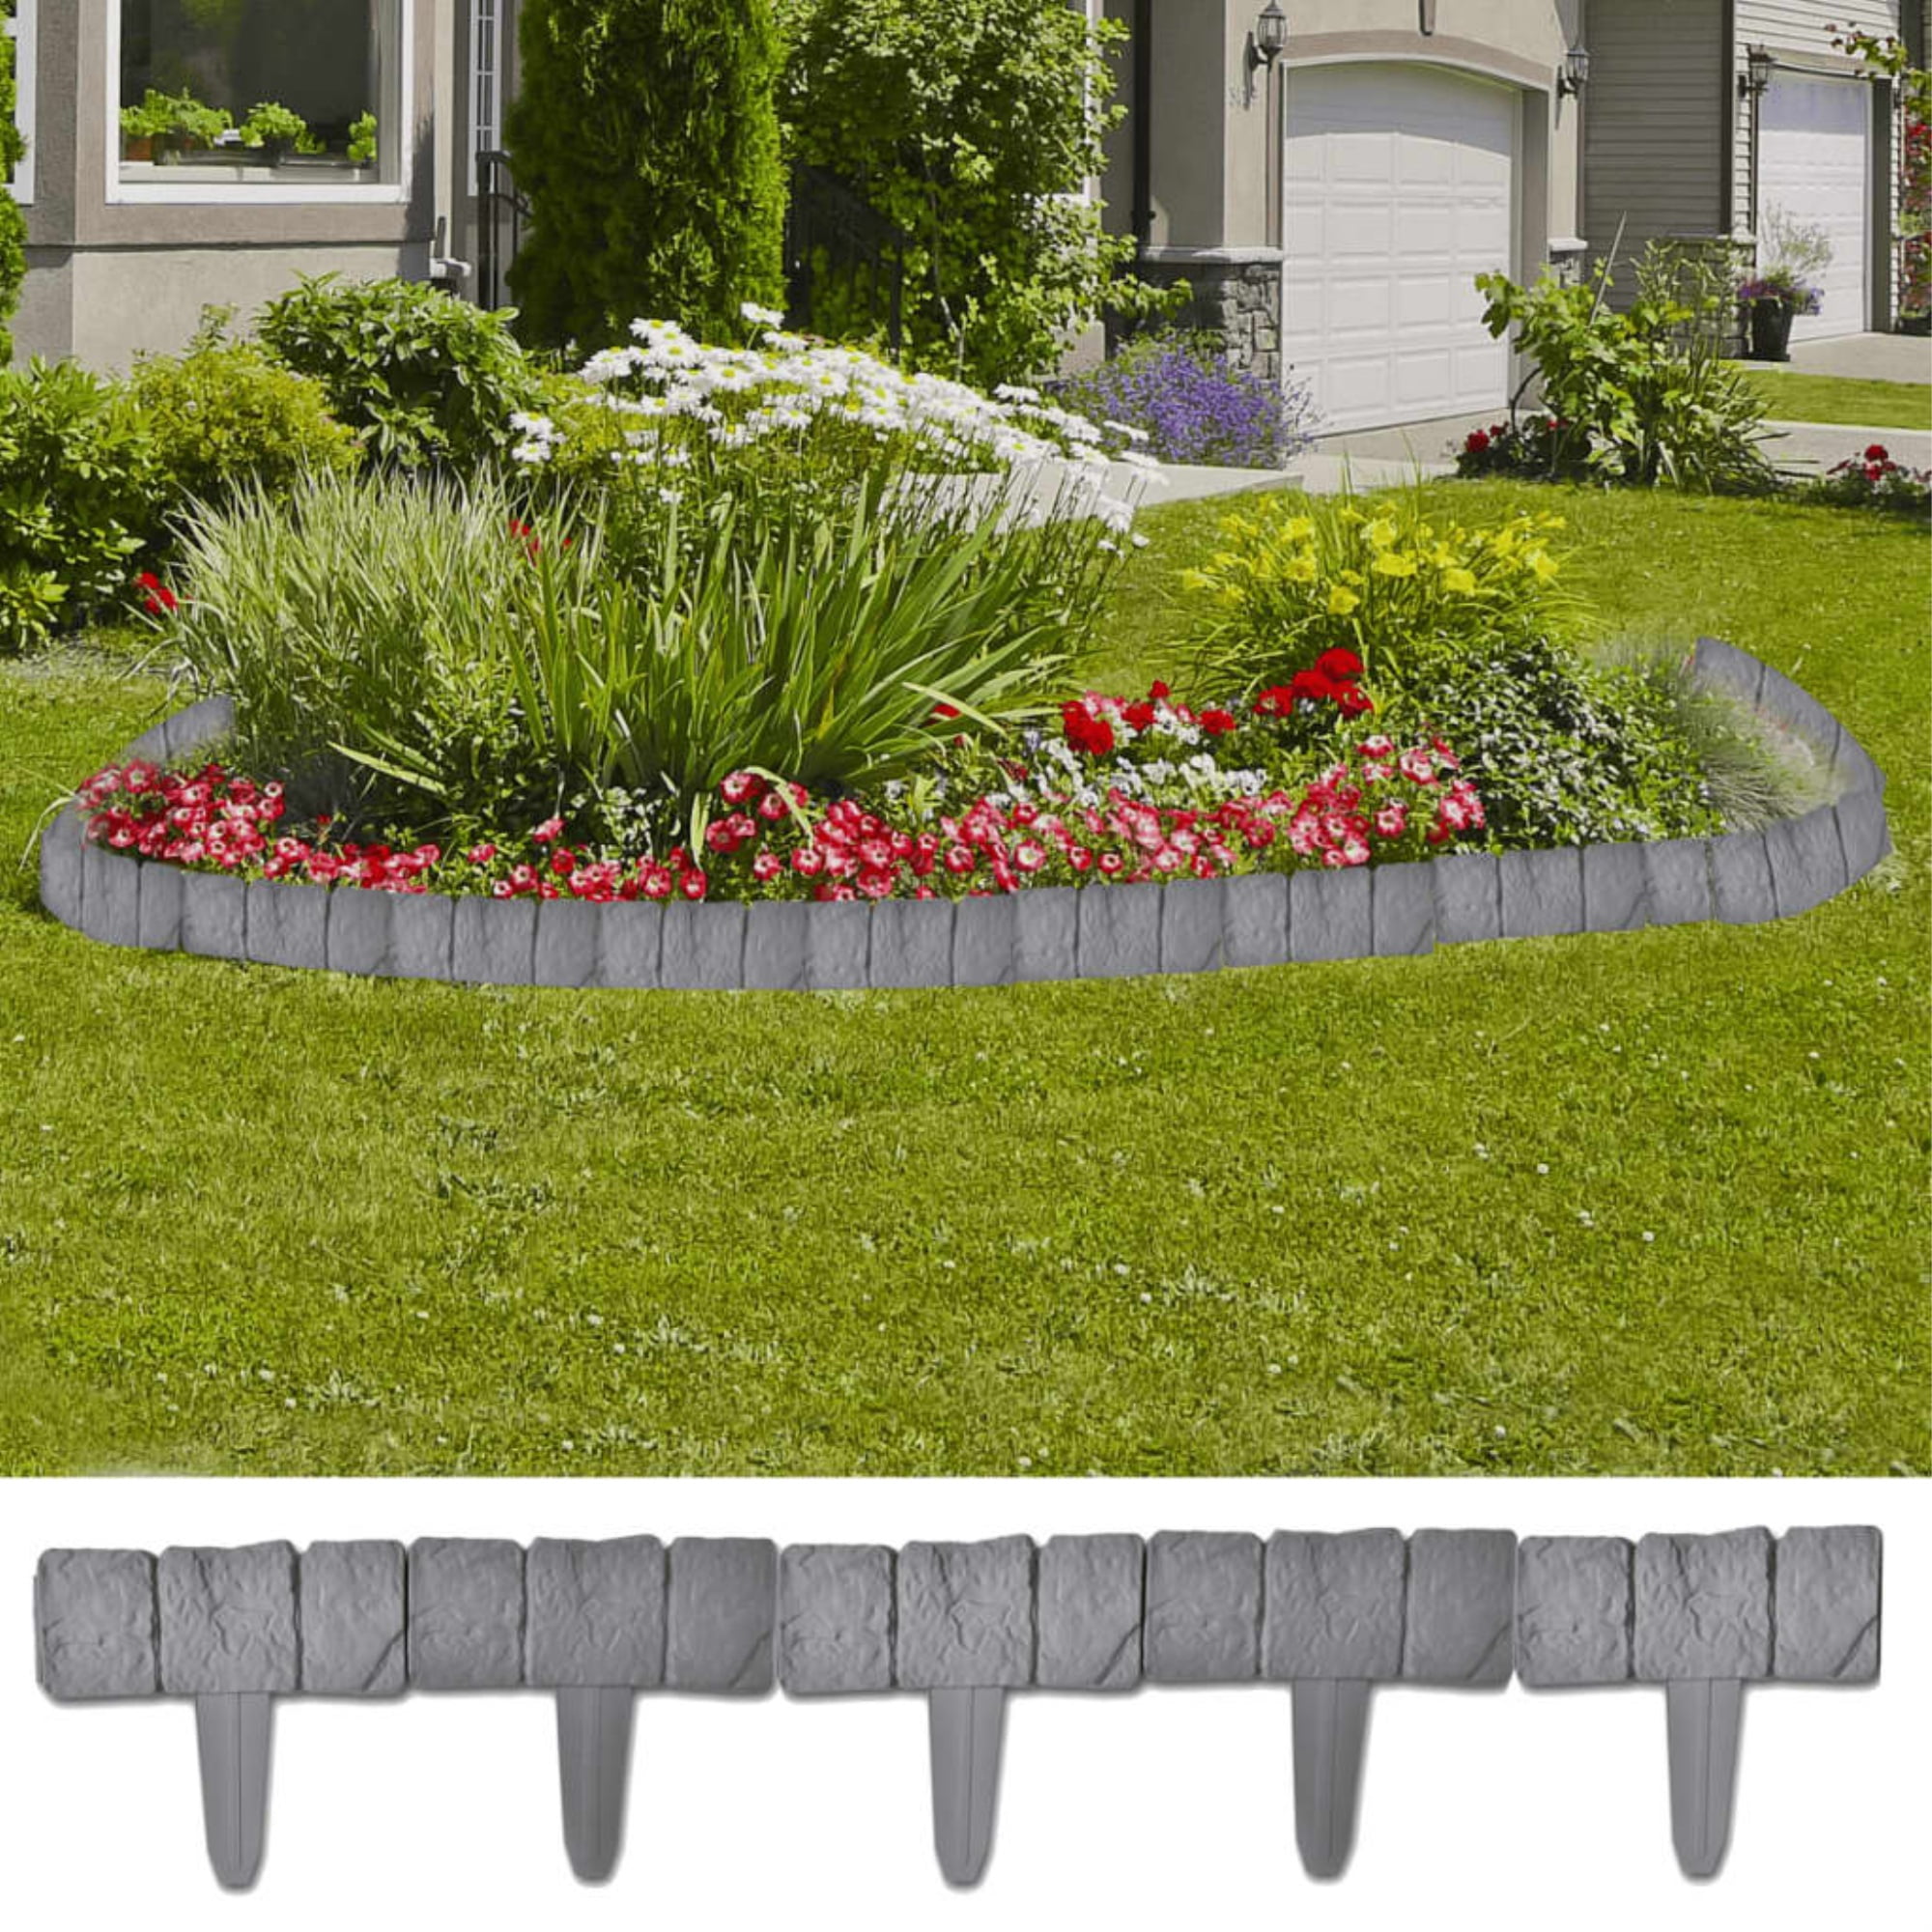 30x13cm Spikes Pair Lawn Garden Grass Aerator Aerating Tool Shoes Sandals C0K1 